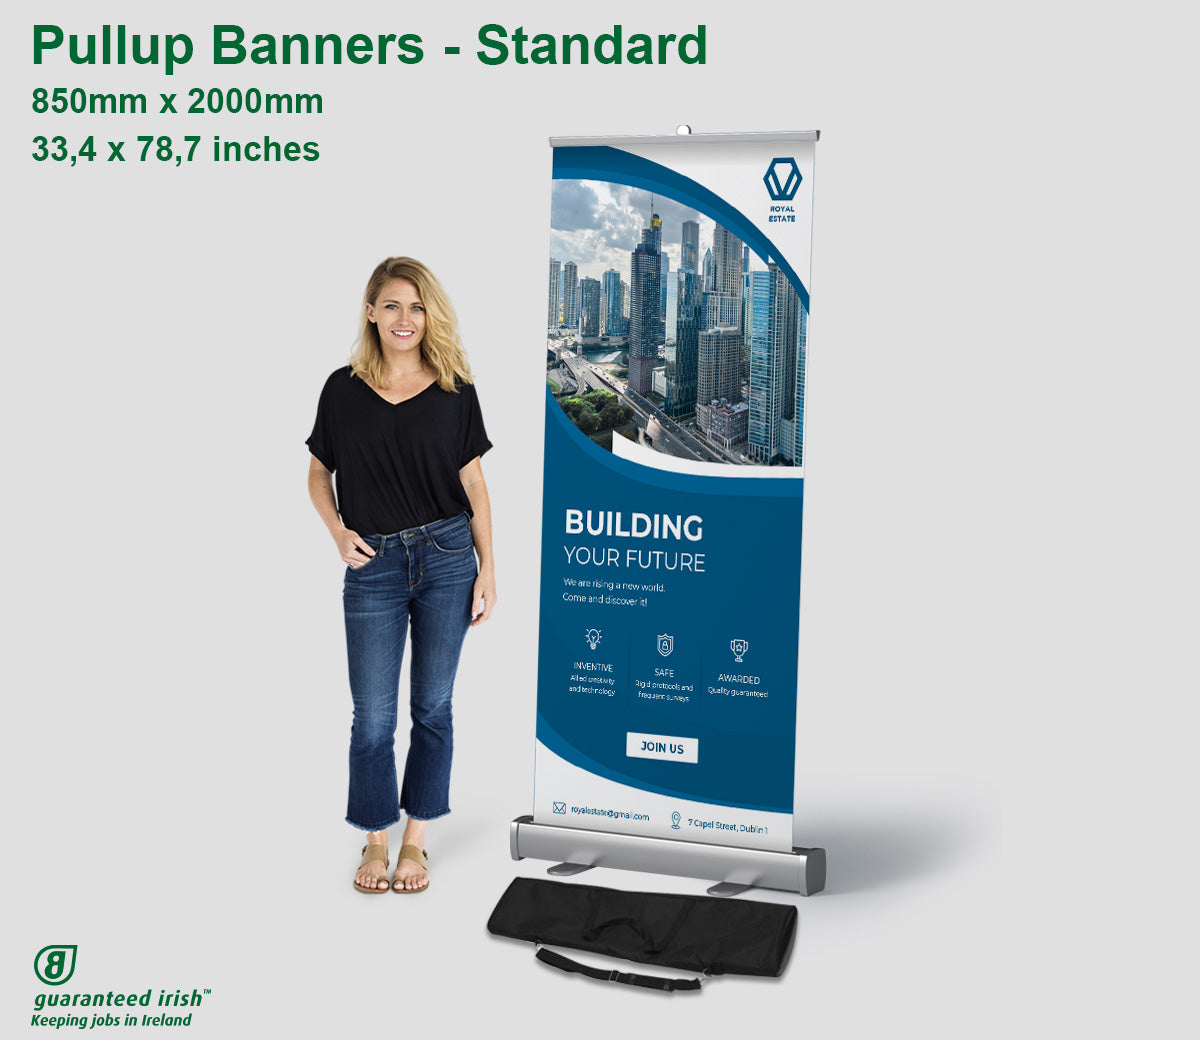 Pullup Banners - Standard